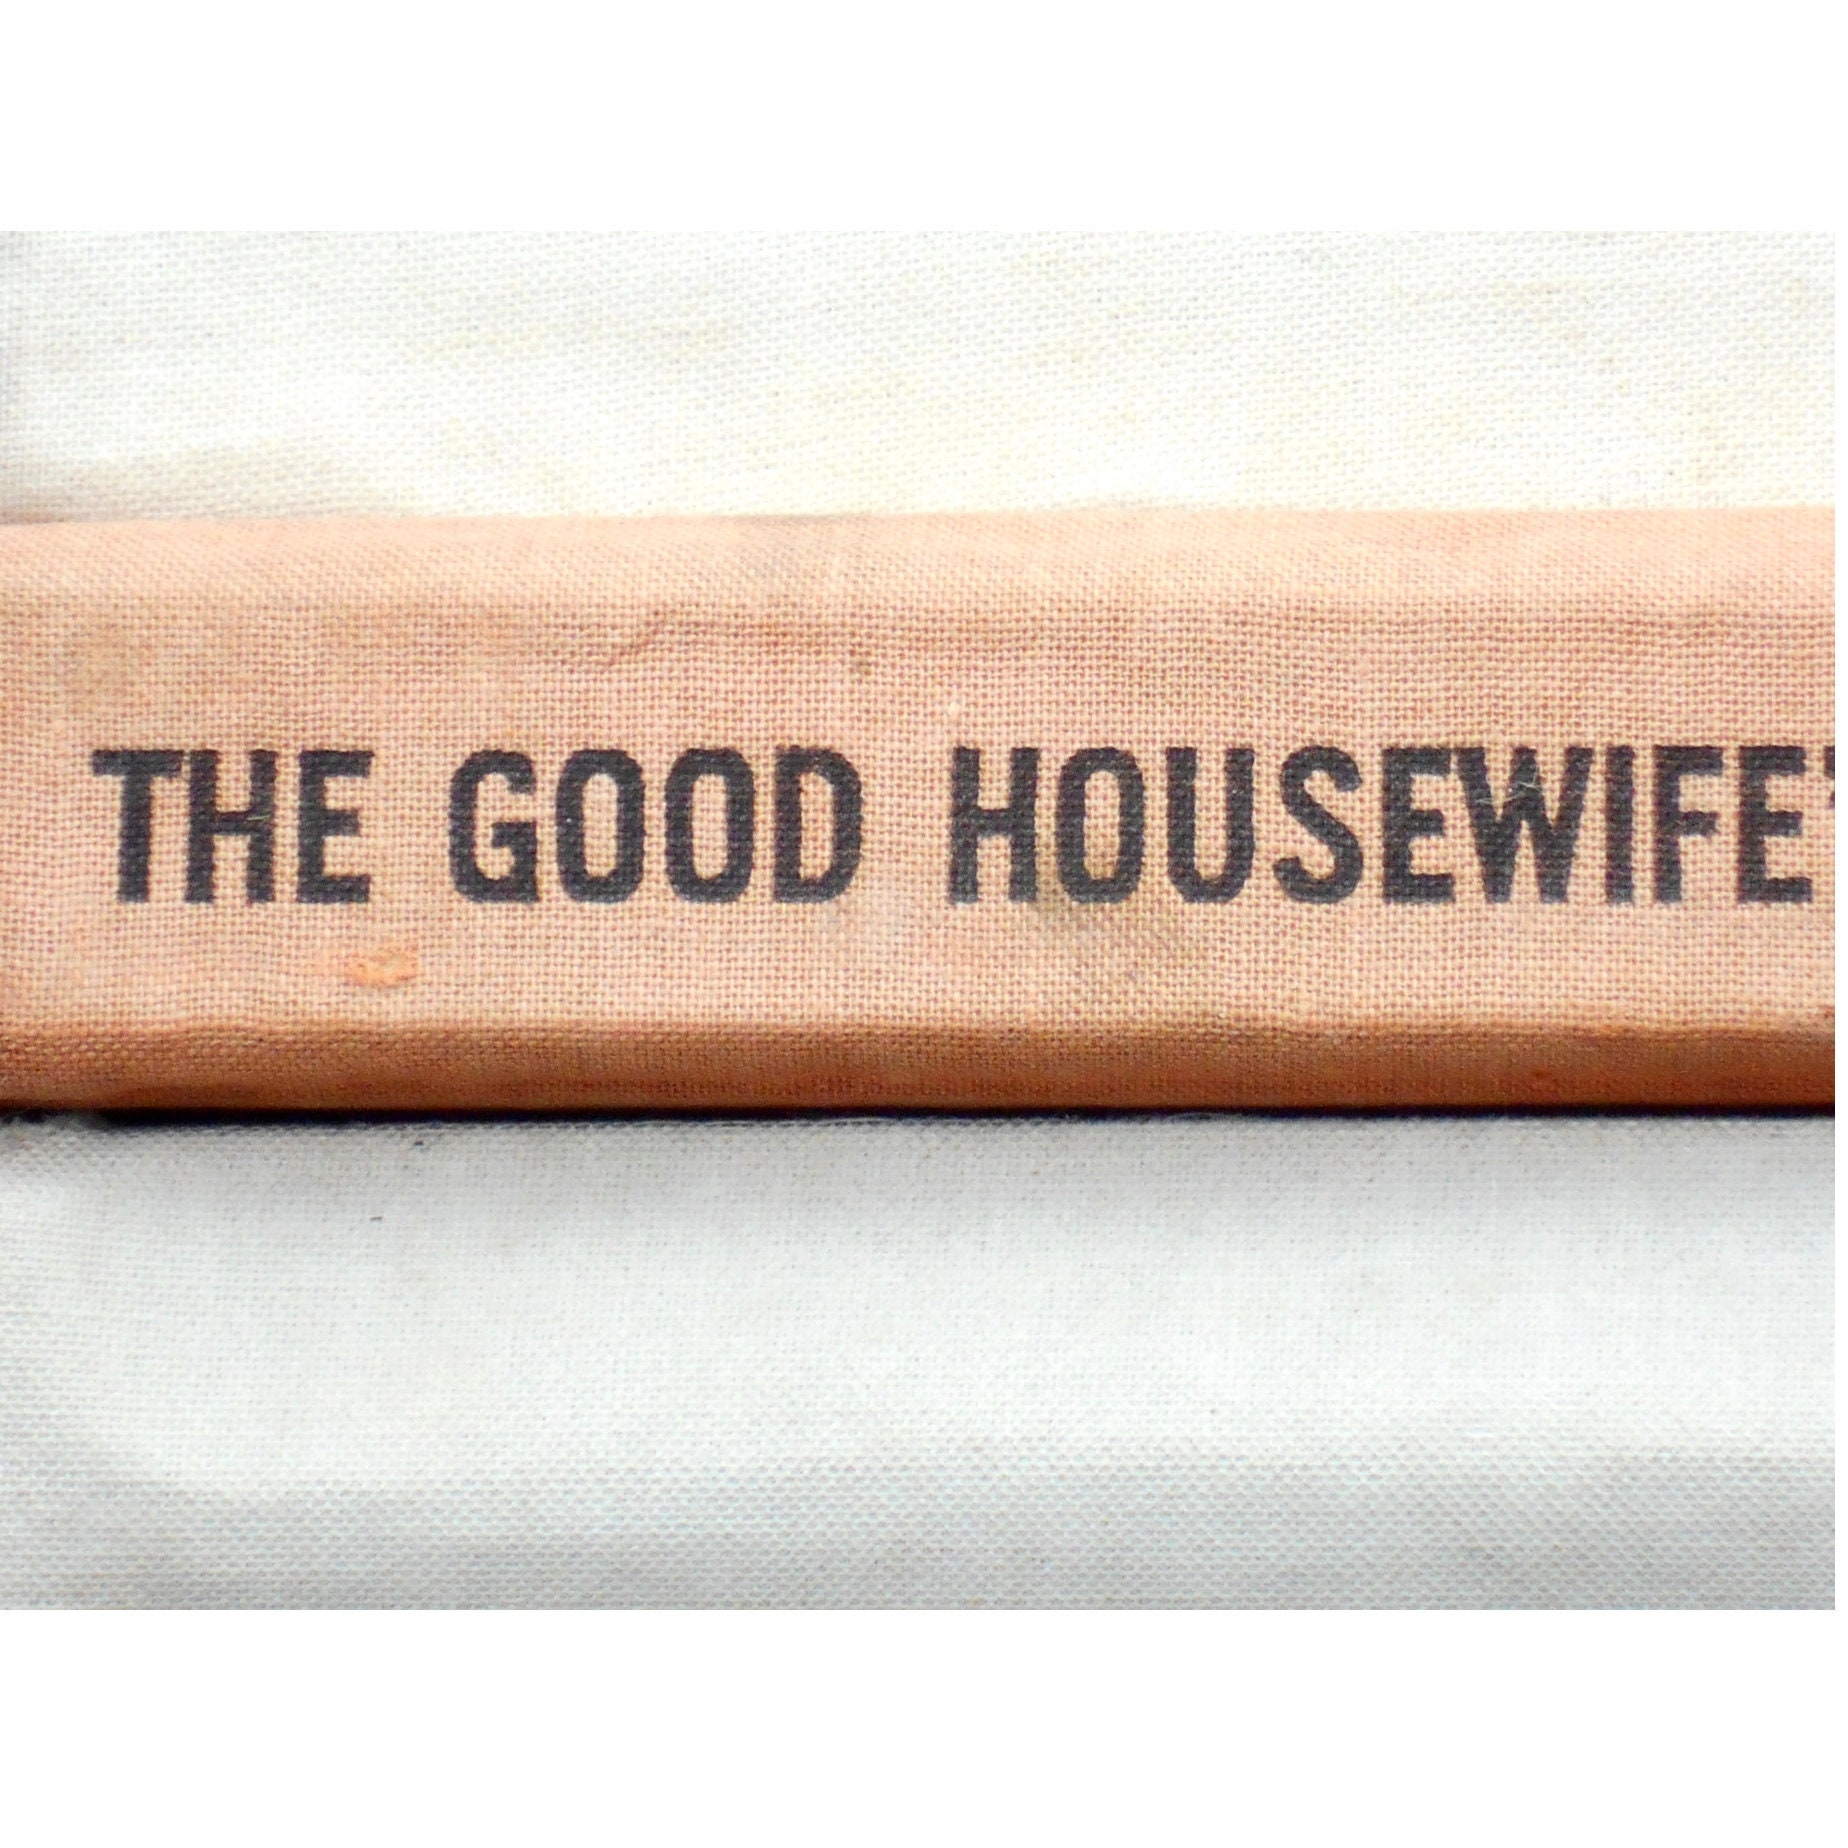 1960s Housewifes Manual Homemaking Book pic